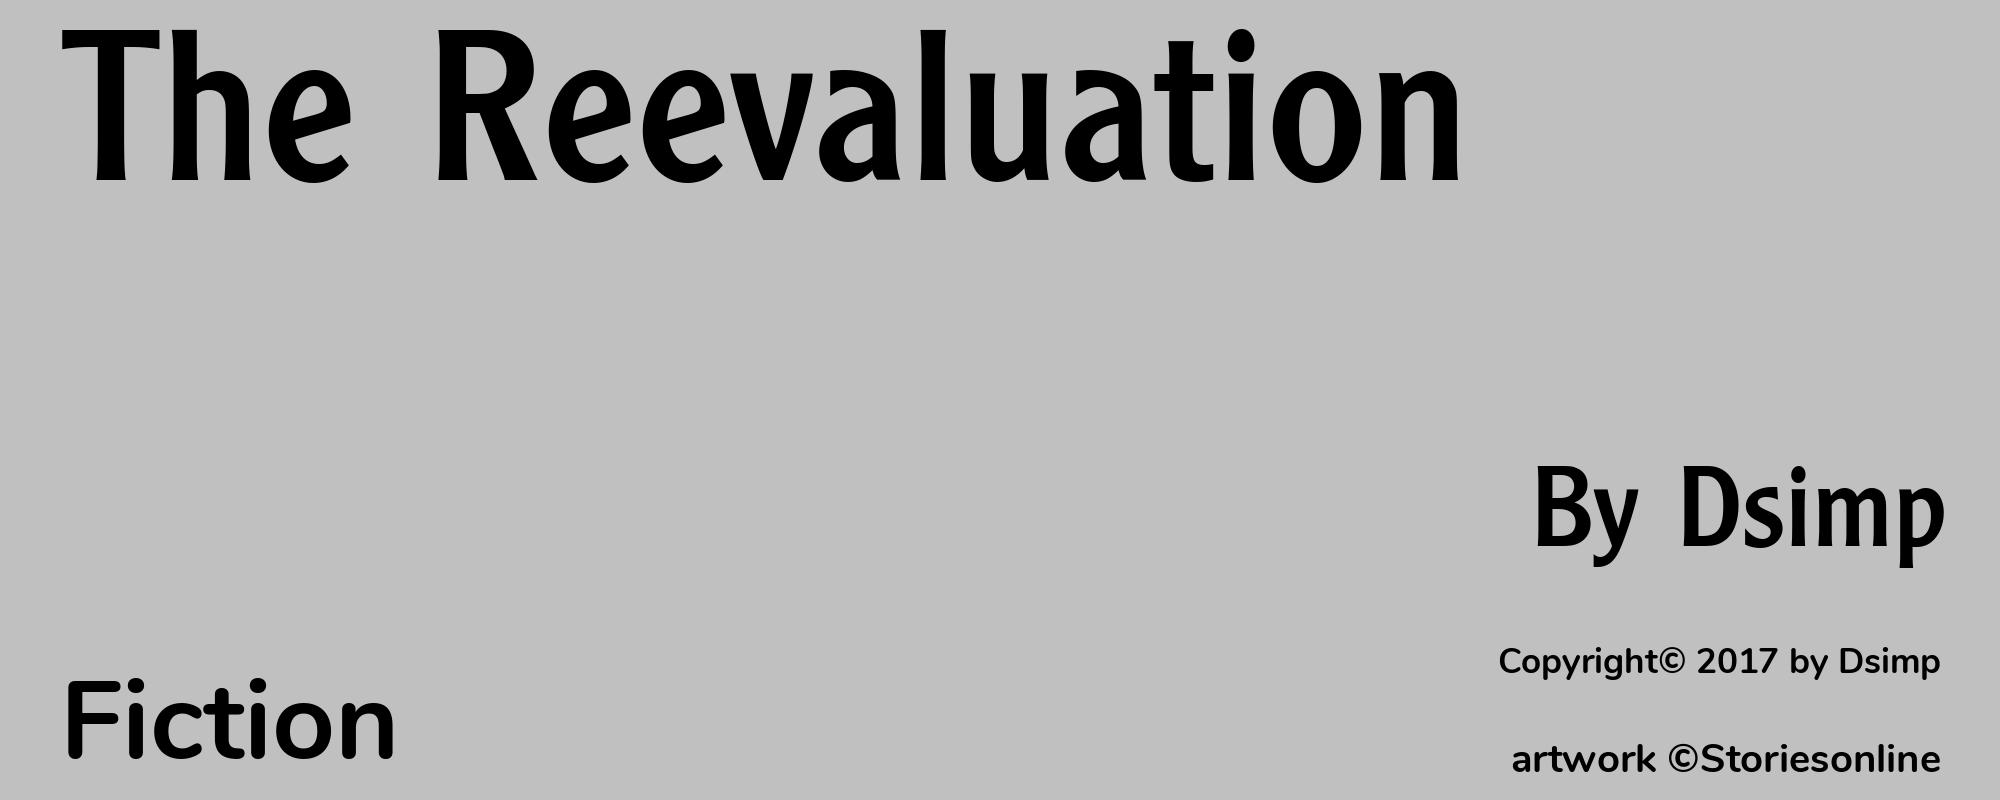 The Reevaluation - Cover